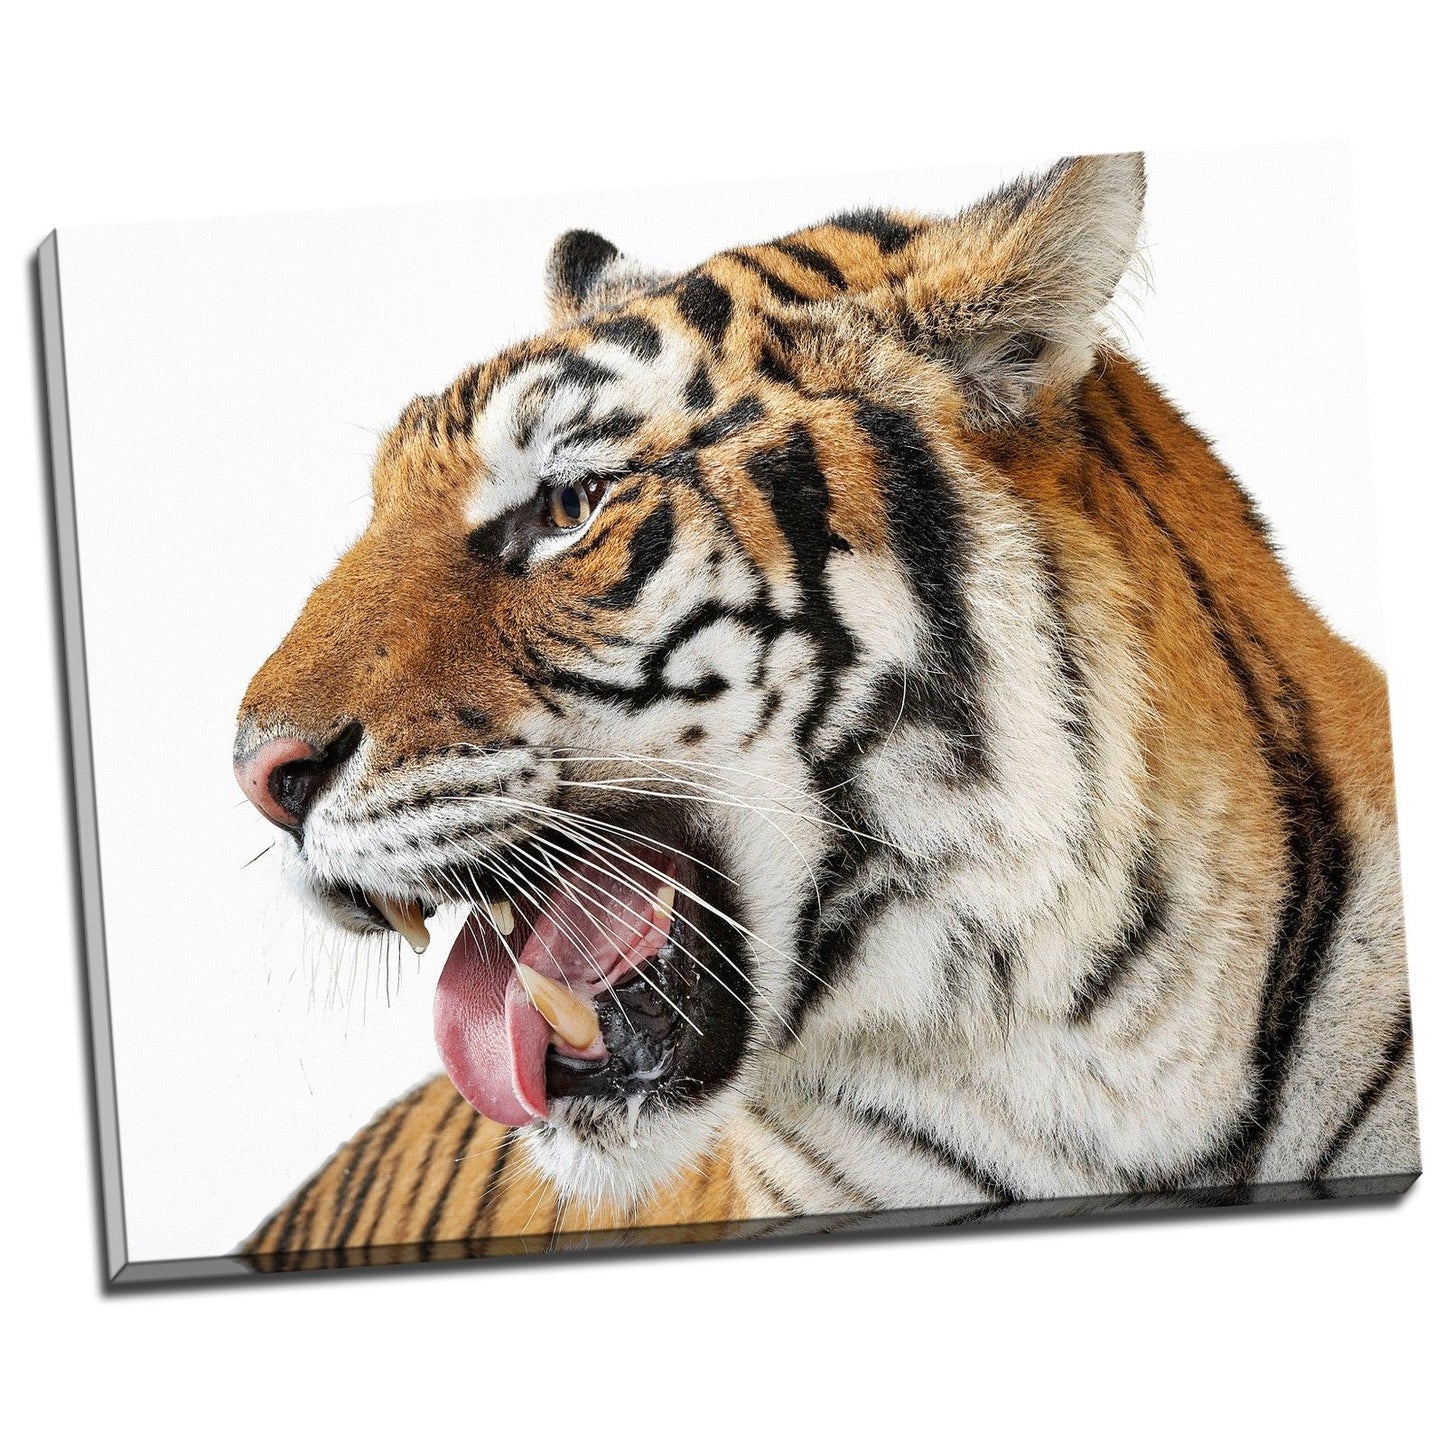 Tiger Face Framed Canvas Photo Art Animal Nature Print Home Decor Wall